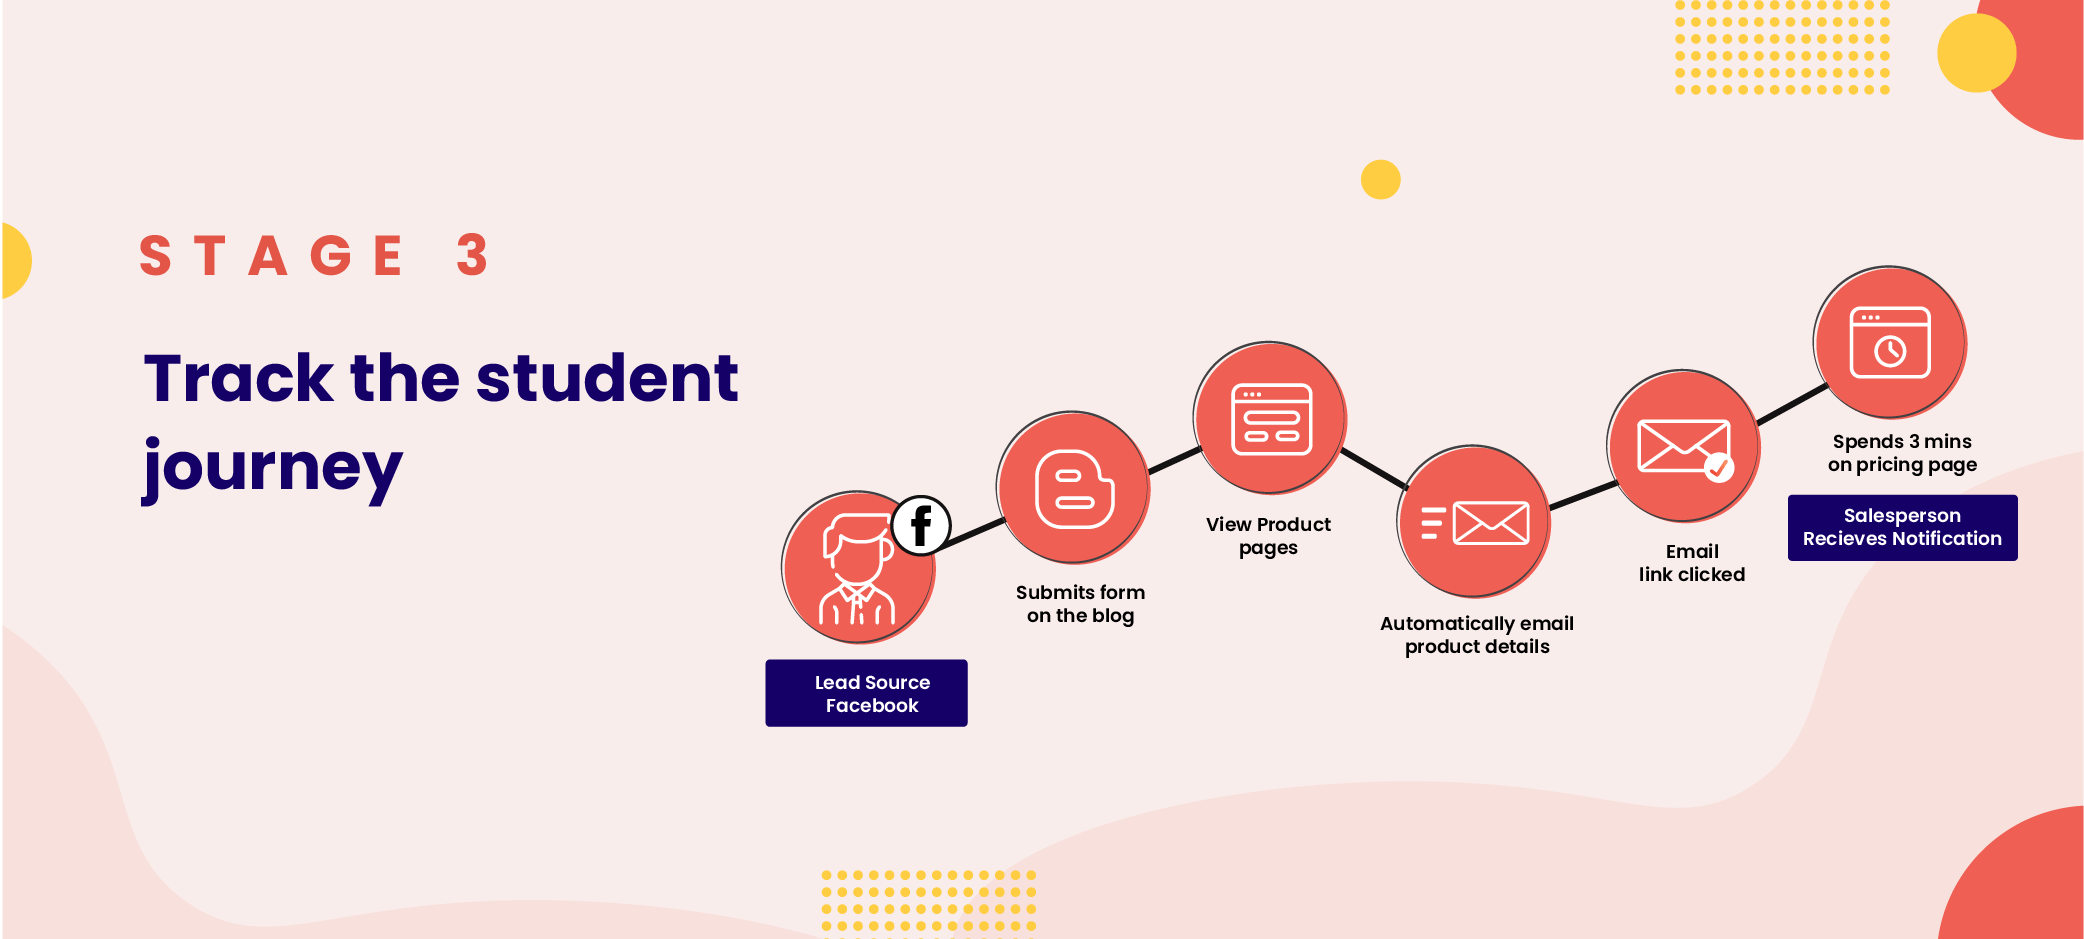 Track and manage the end-to-end student journey